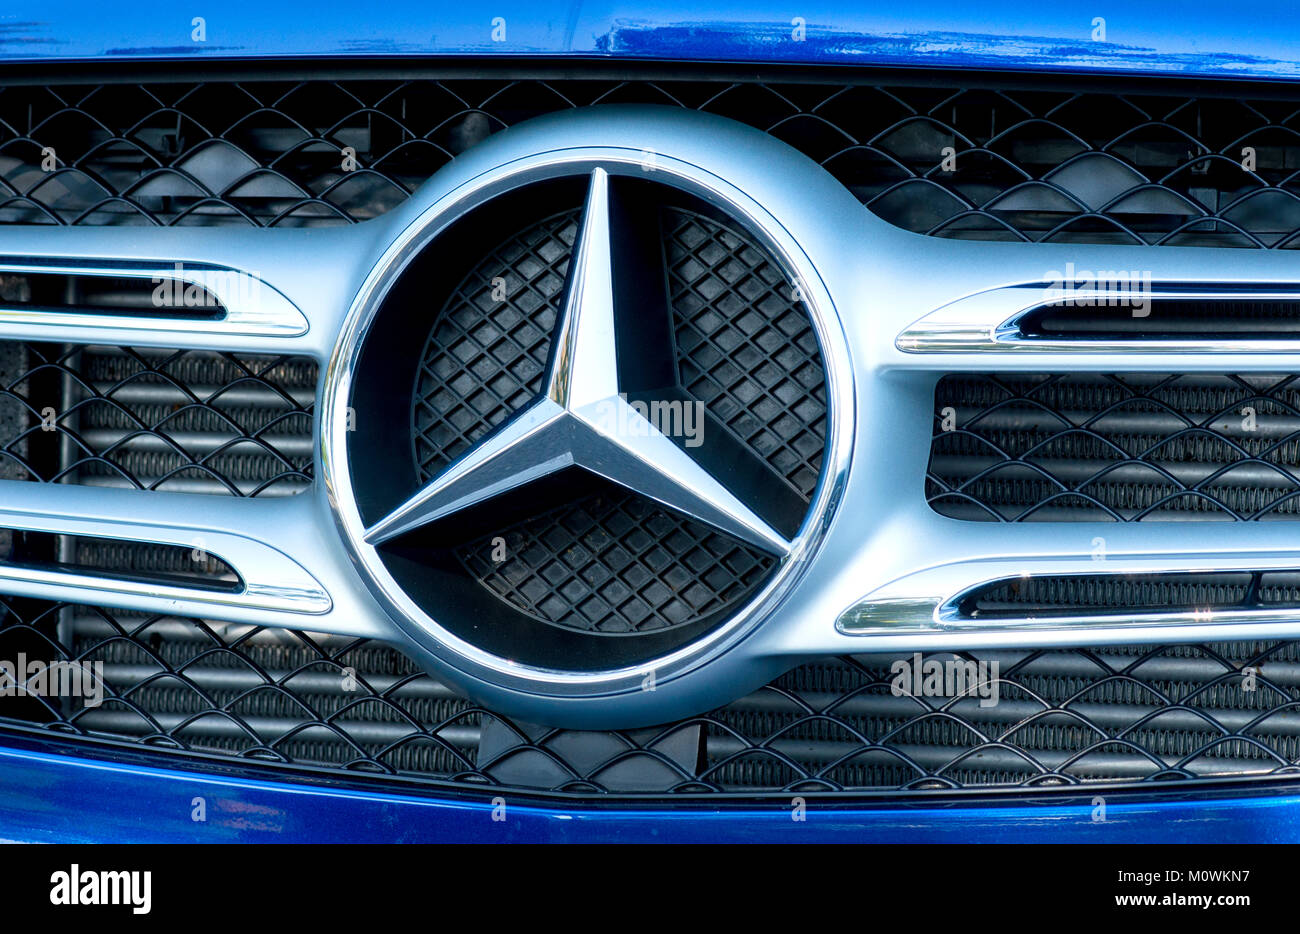 GALATI, ROMANIA SEPTEMBER, 2017: Mercedes Benz logo close up on a car grill. Mercedes-Benz is a German automobile manufacturer. Stock Photo